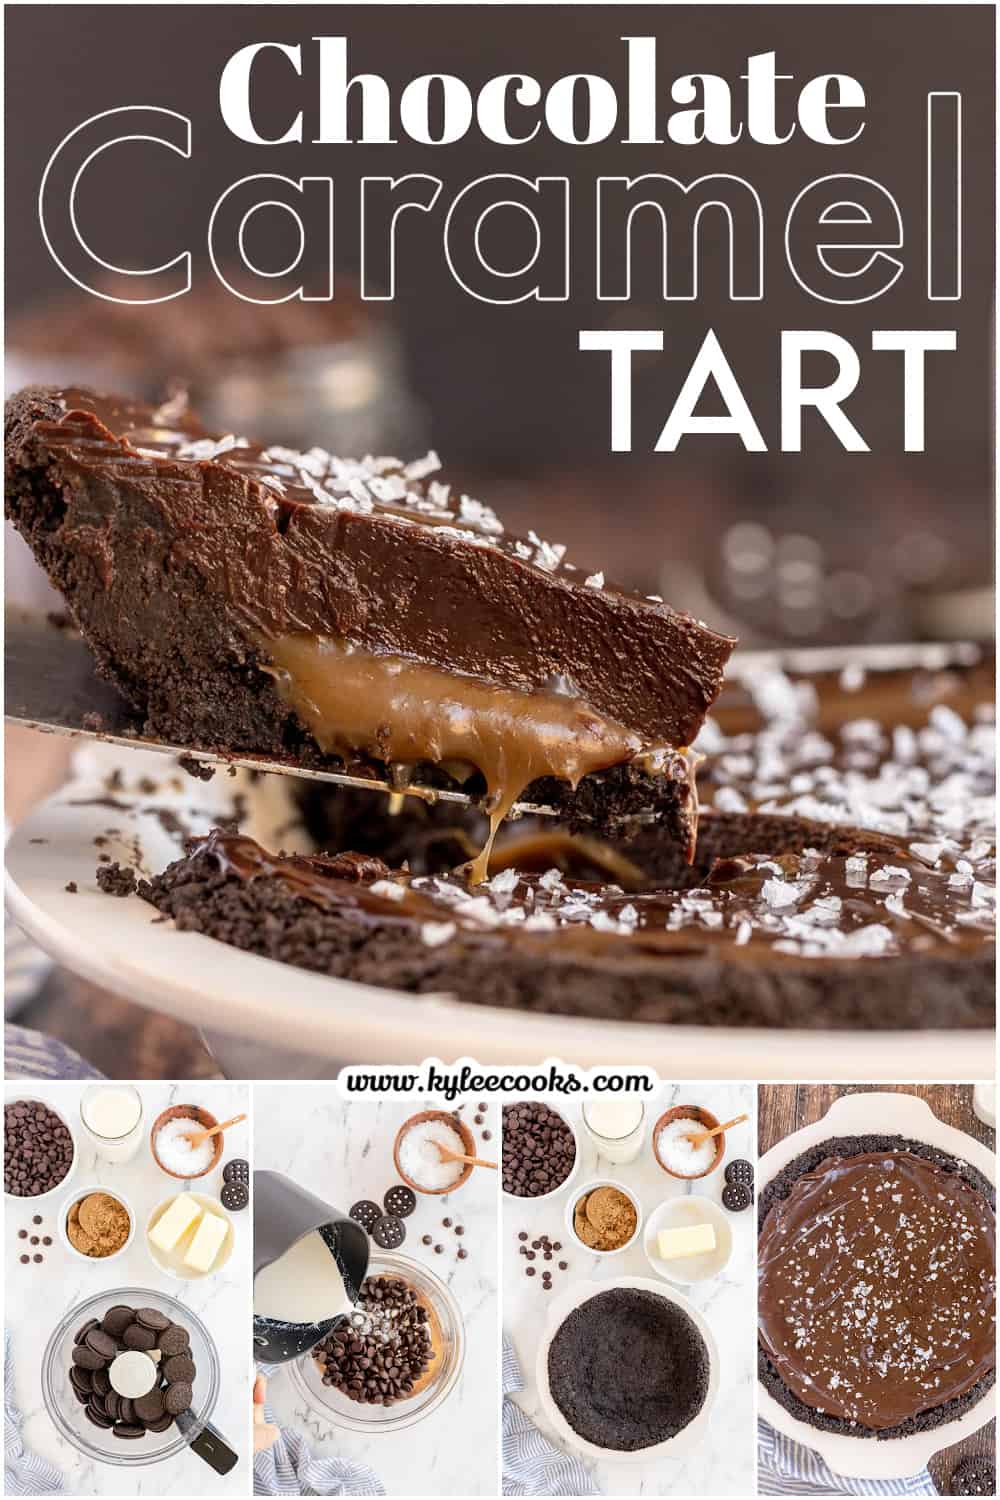 Chocolate Caramel tart in a pie plate with a slice being removed.